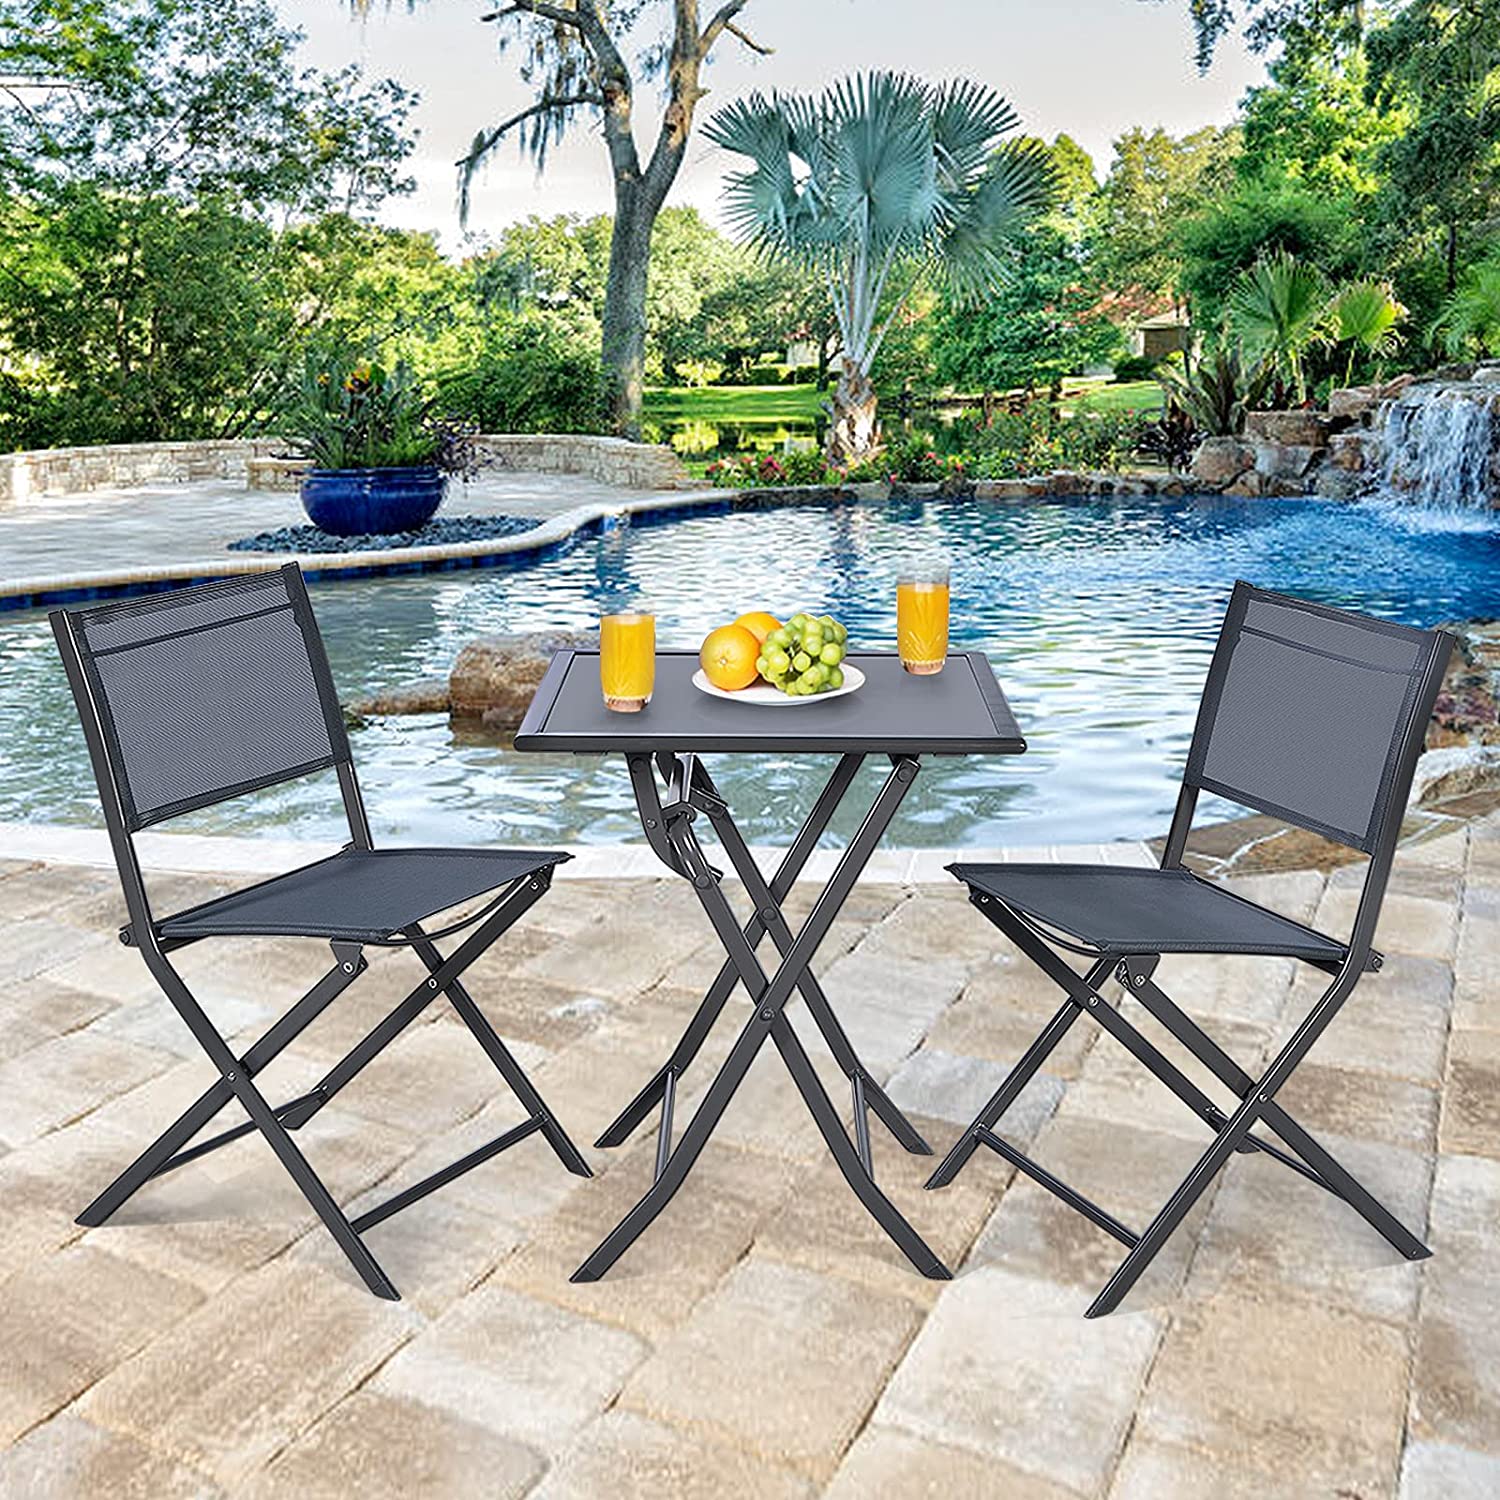 3 pieces bistro furniture set garden backyard round table and folding chair set